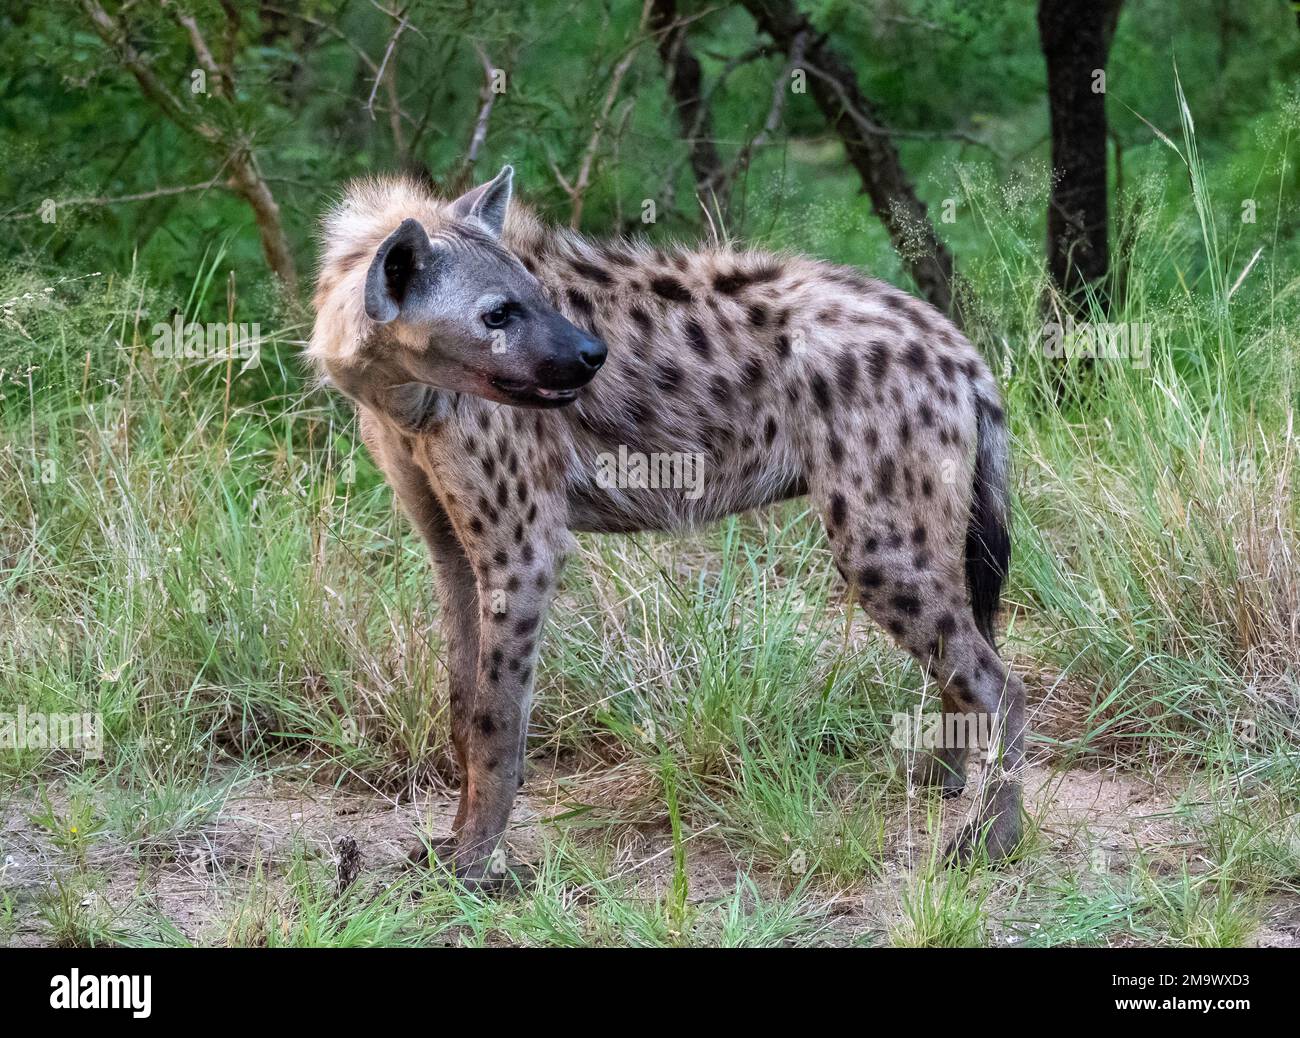 A Spotted Hyena (Crocuta crocuta), or Laughing Hyena, in the bush. Kruger National Park, South Africa. Stock Photo